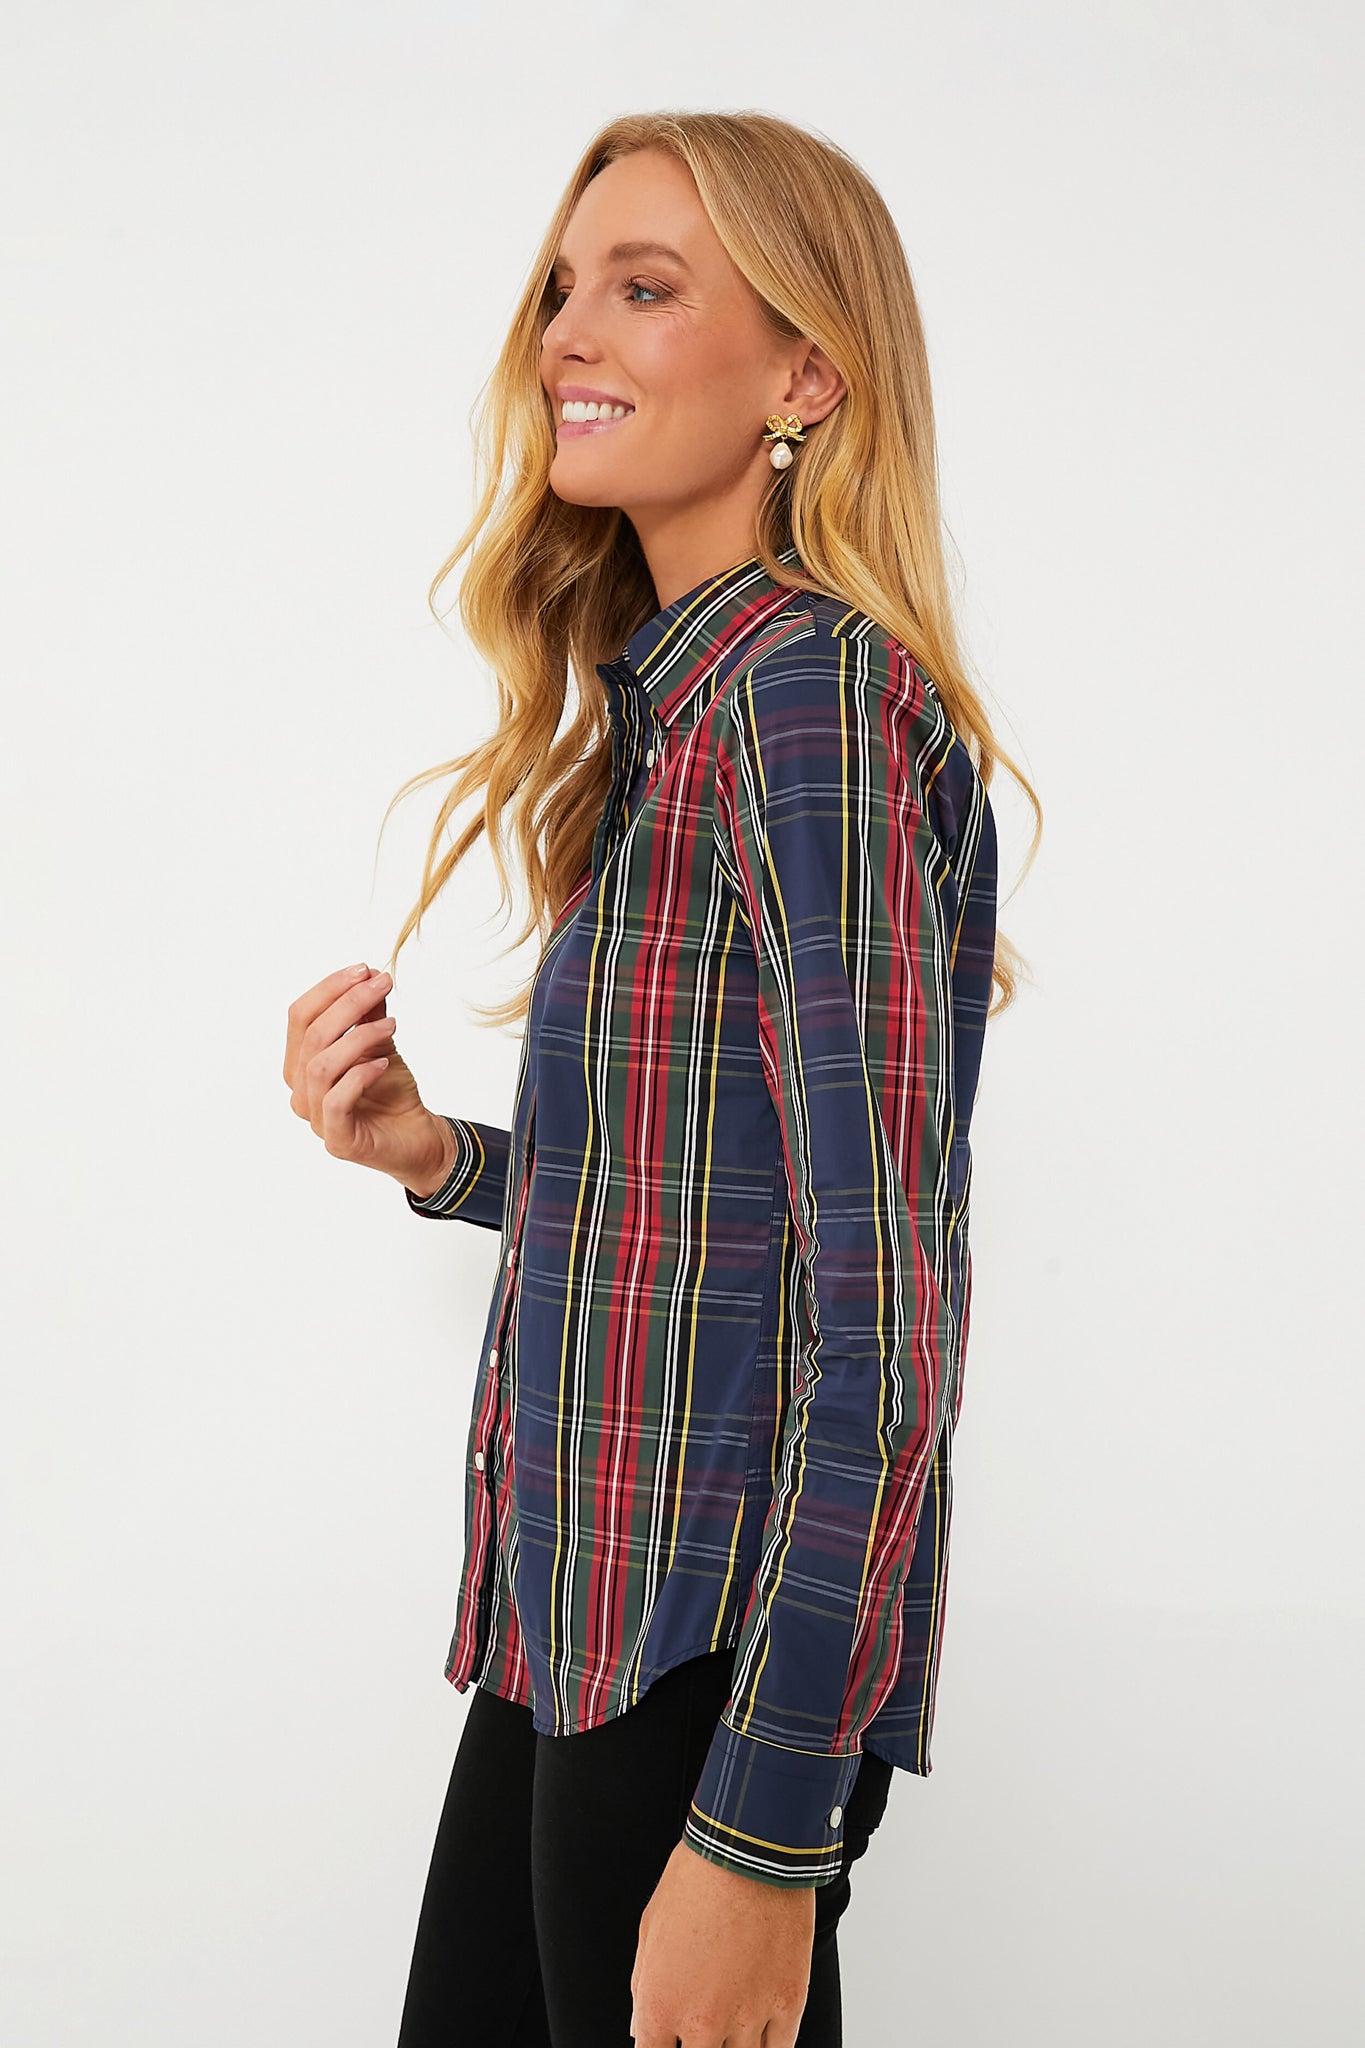 The Shirt by Rochelle Behrens Red Plaid Icon Shirt Size XS